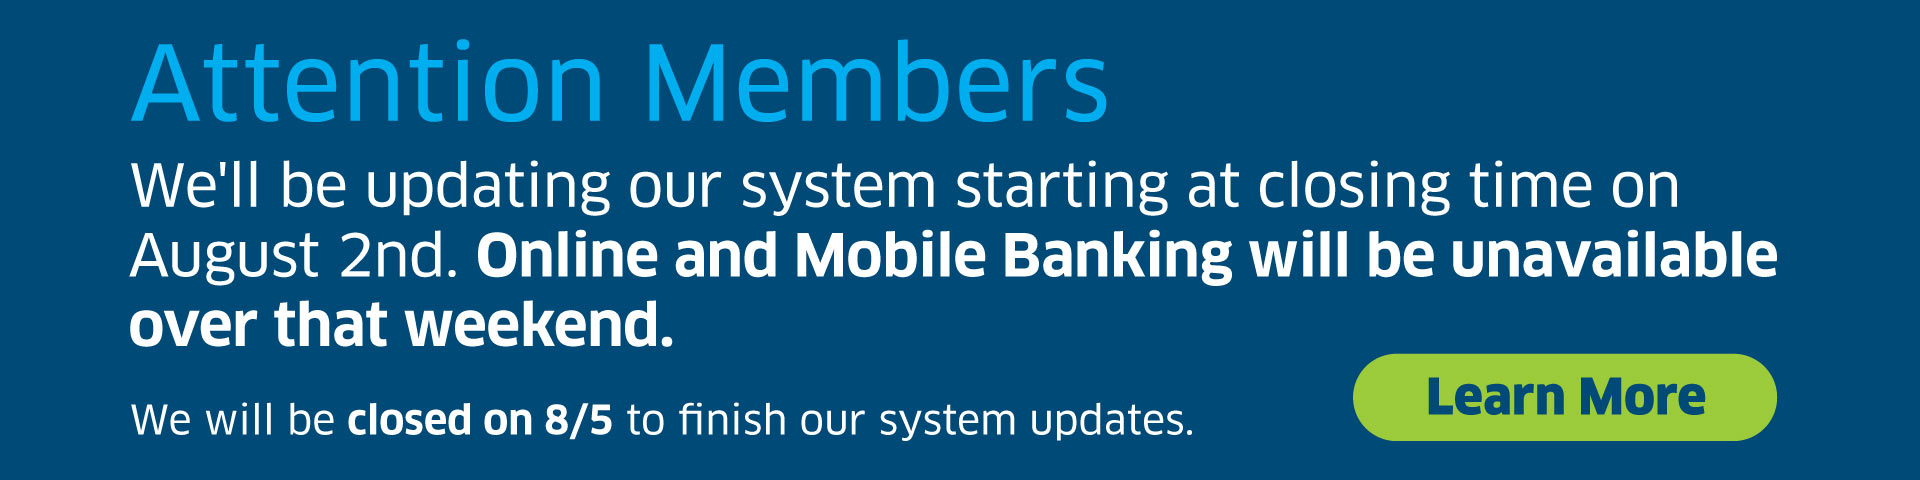 Due to system updates online & mobile banking will be unavailable the evening of Aug 2-5